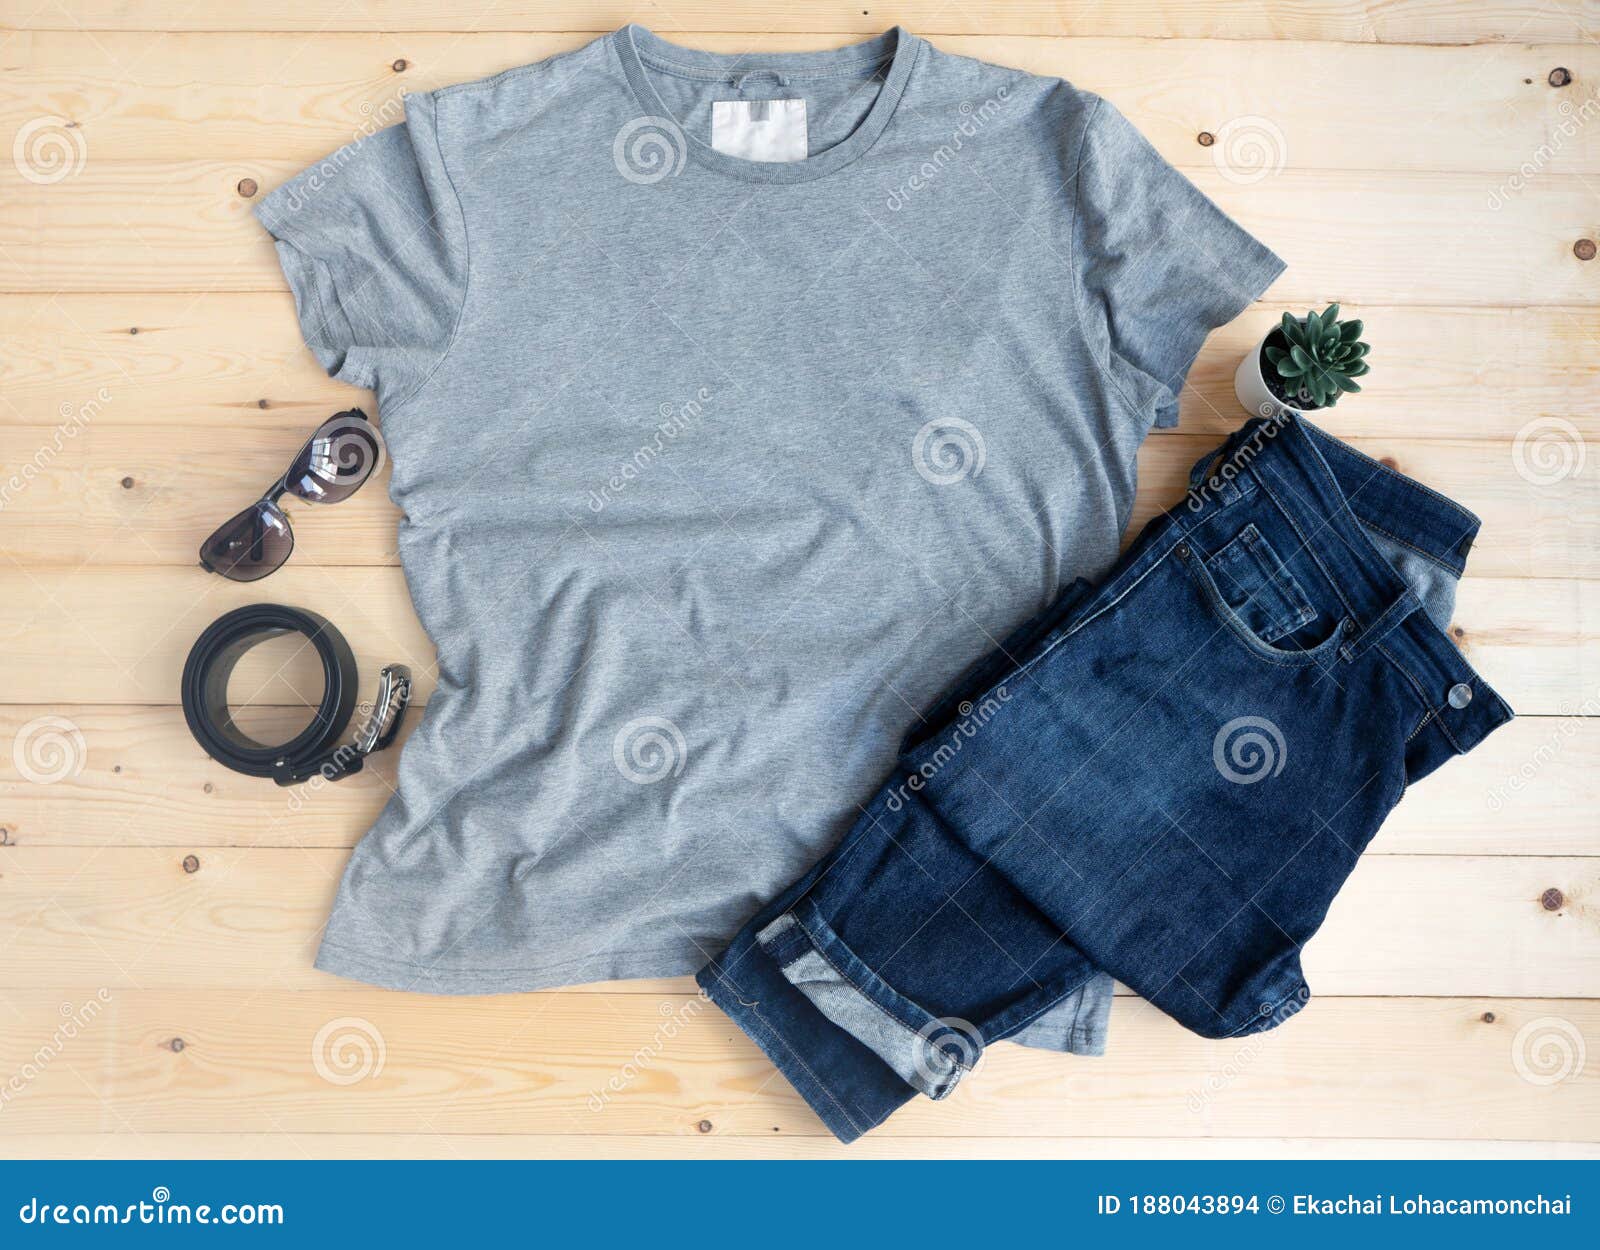 Gray Male T Shirt Mock Up Flat Lay on Wooden Background. Top Front View ...